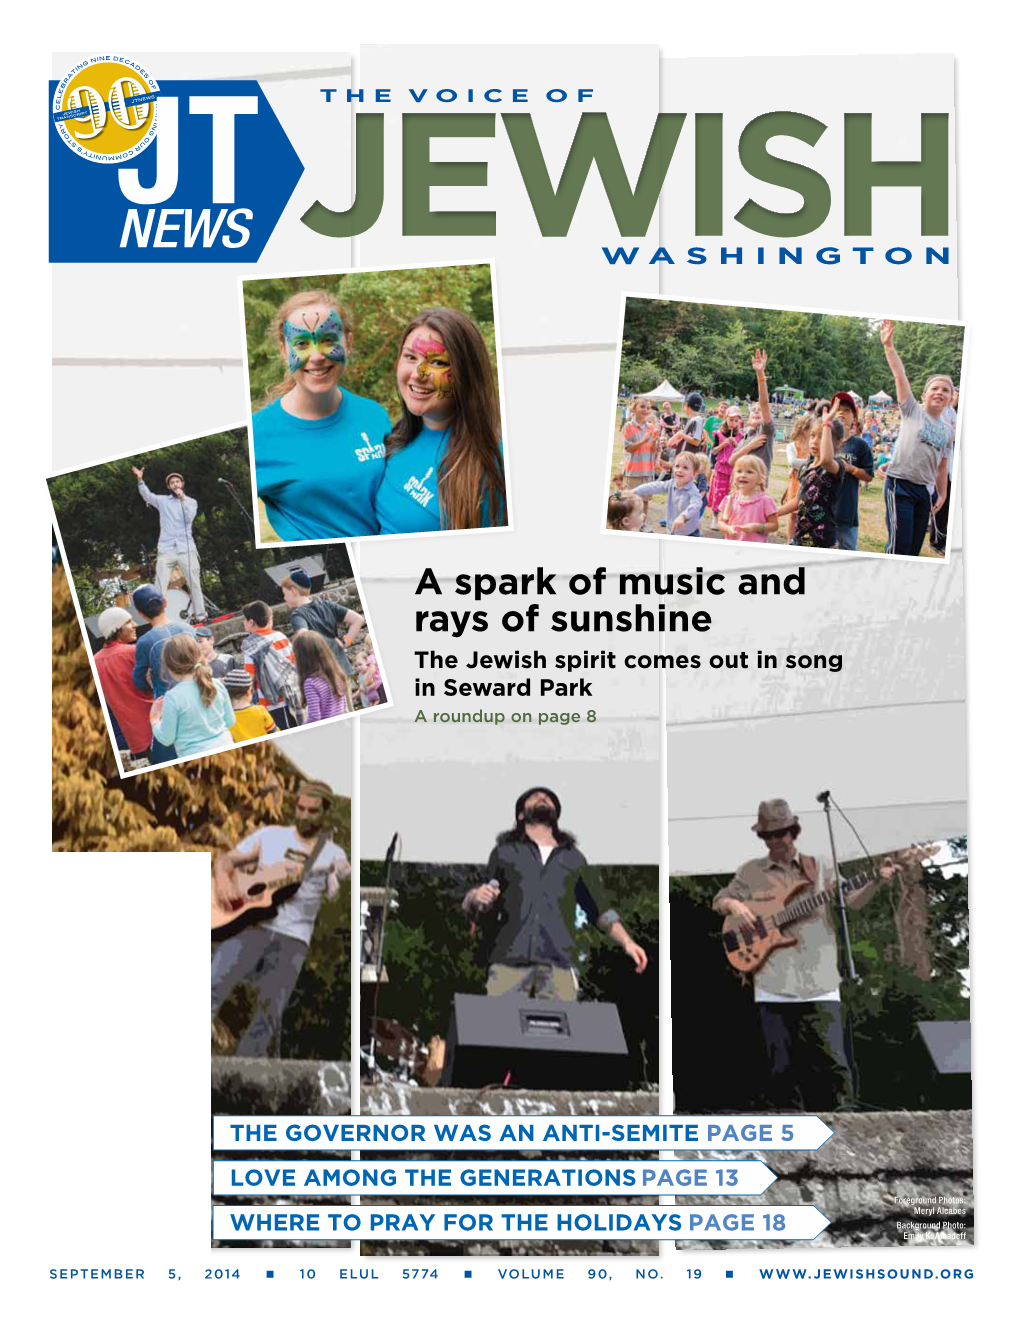 A Spark of Music and Rays of Sunshine the Jewish Spirit Comes out in Song in Seward Park a Roundup on Page 8